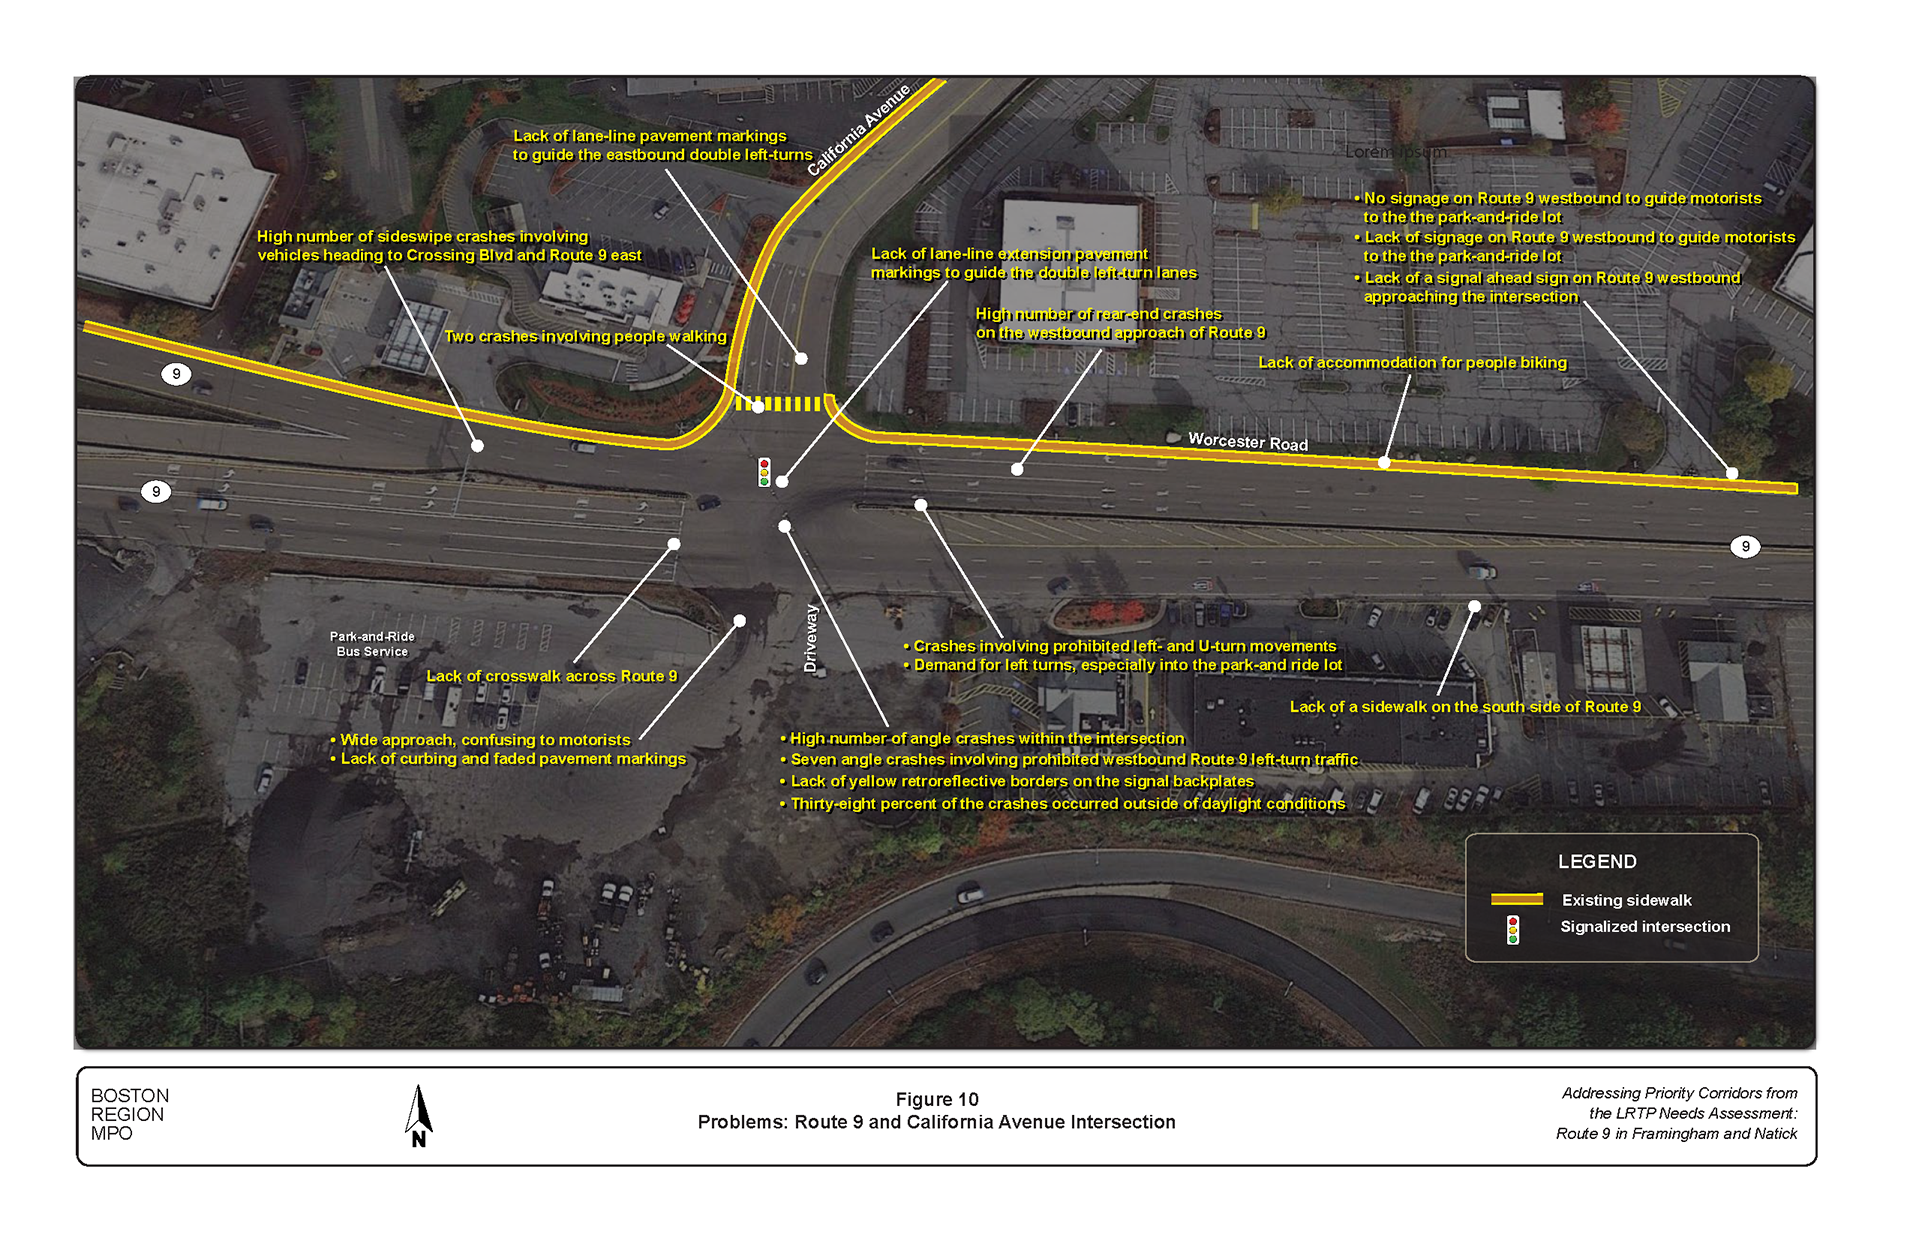 Figure 10 is an aerial photo showing the intersection of Route 9 and California Avenue and the problems